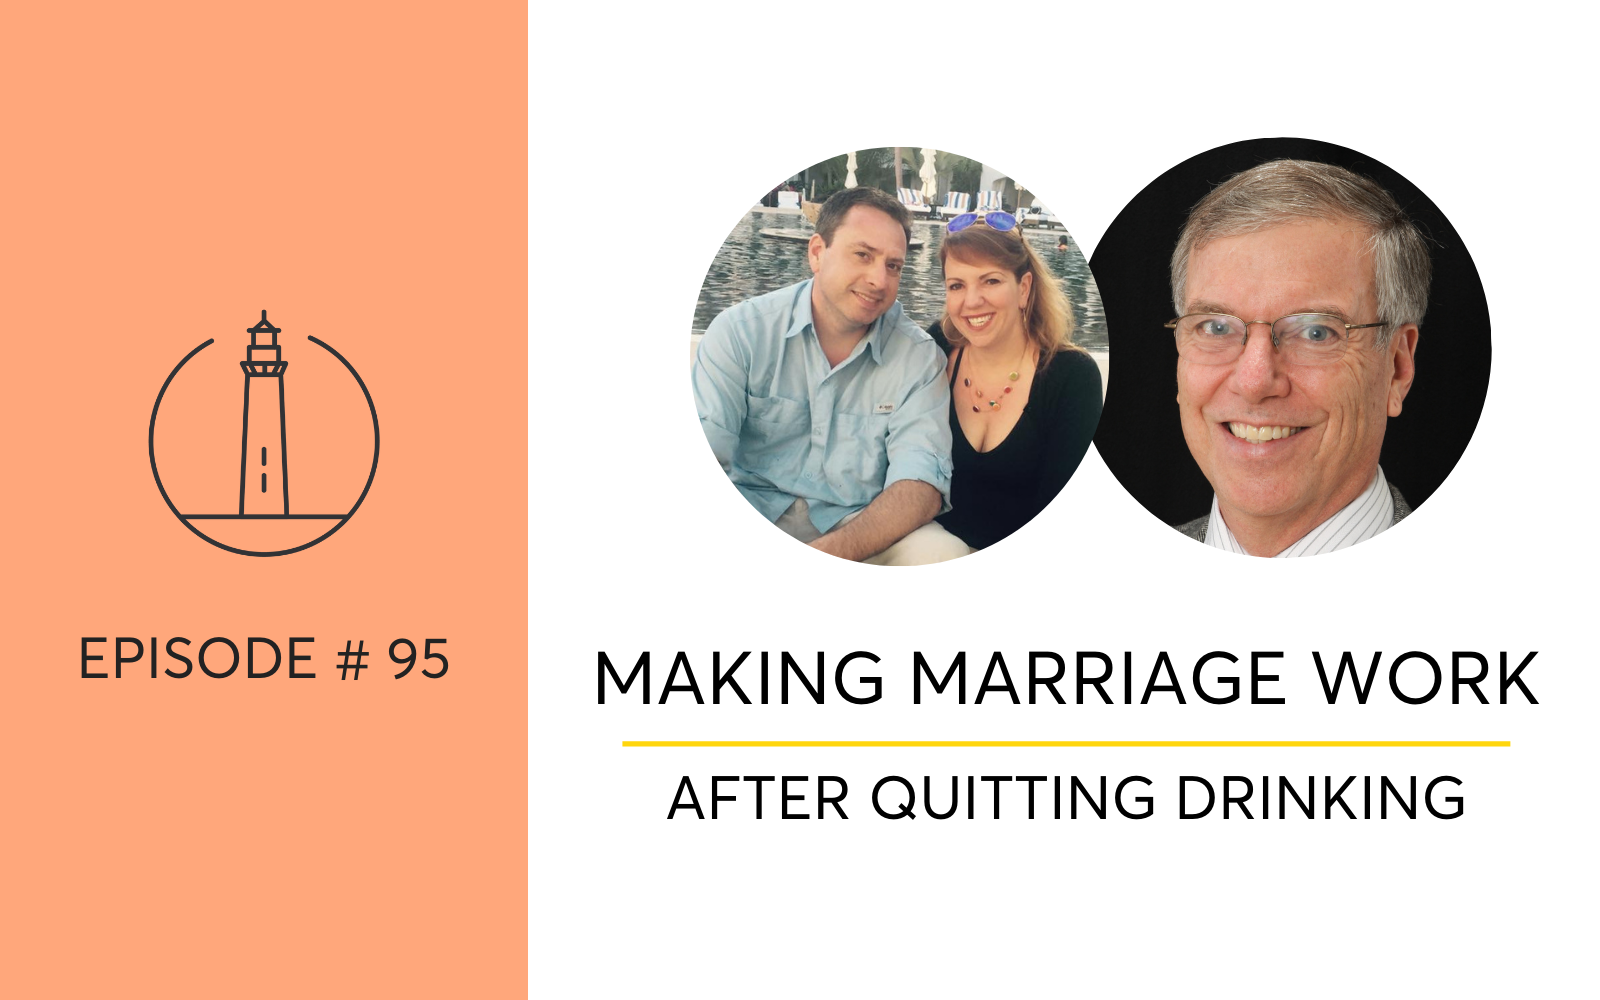 Making Marriage Work After Quitting Drinking